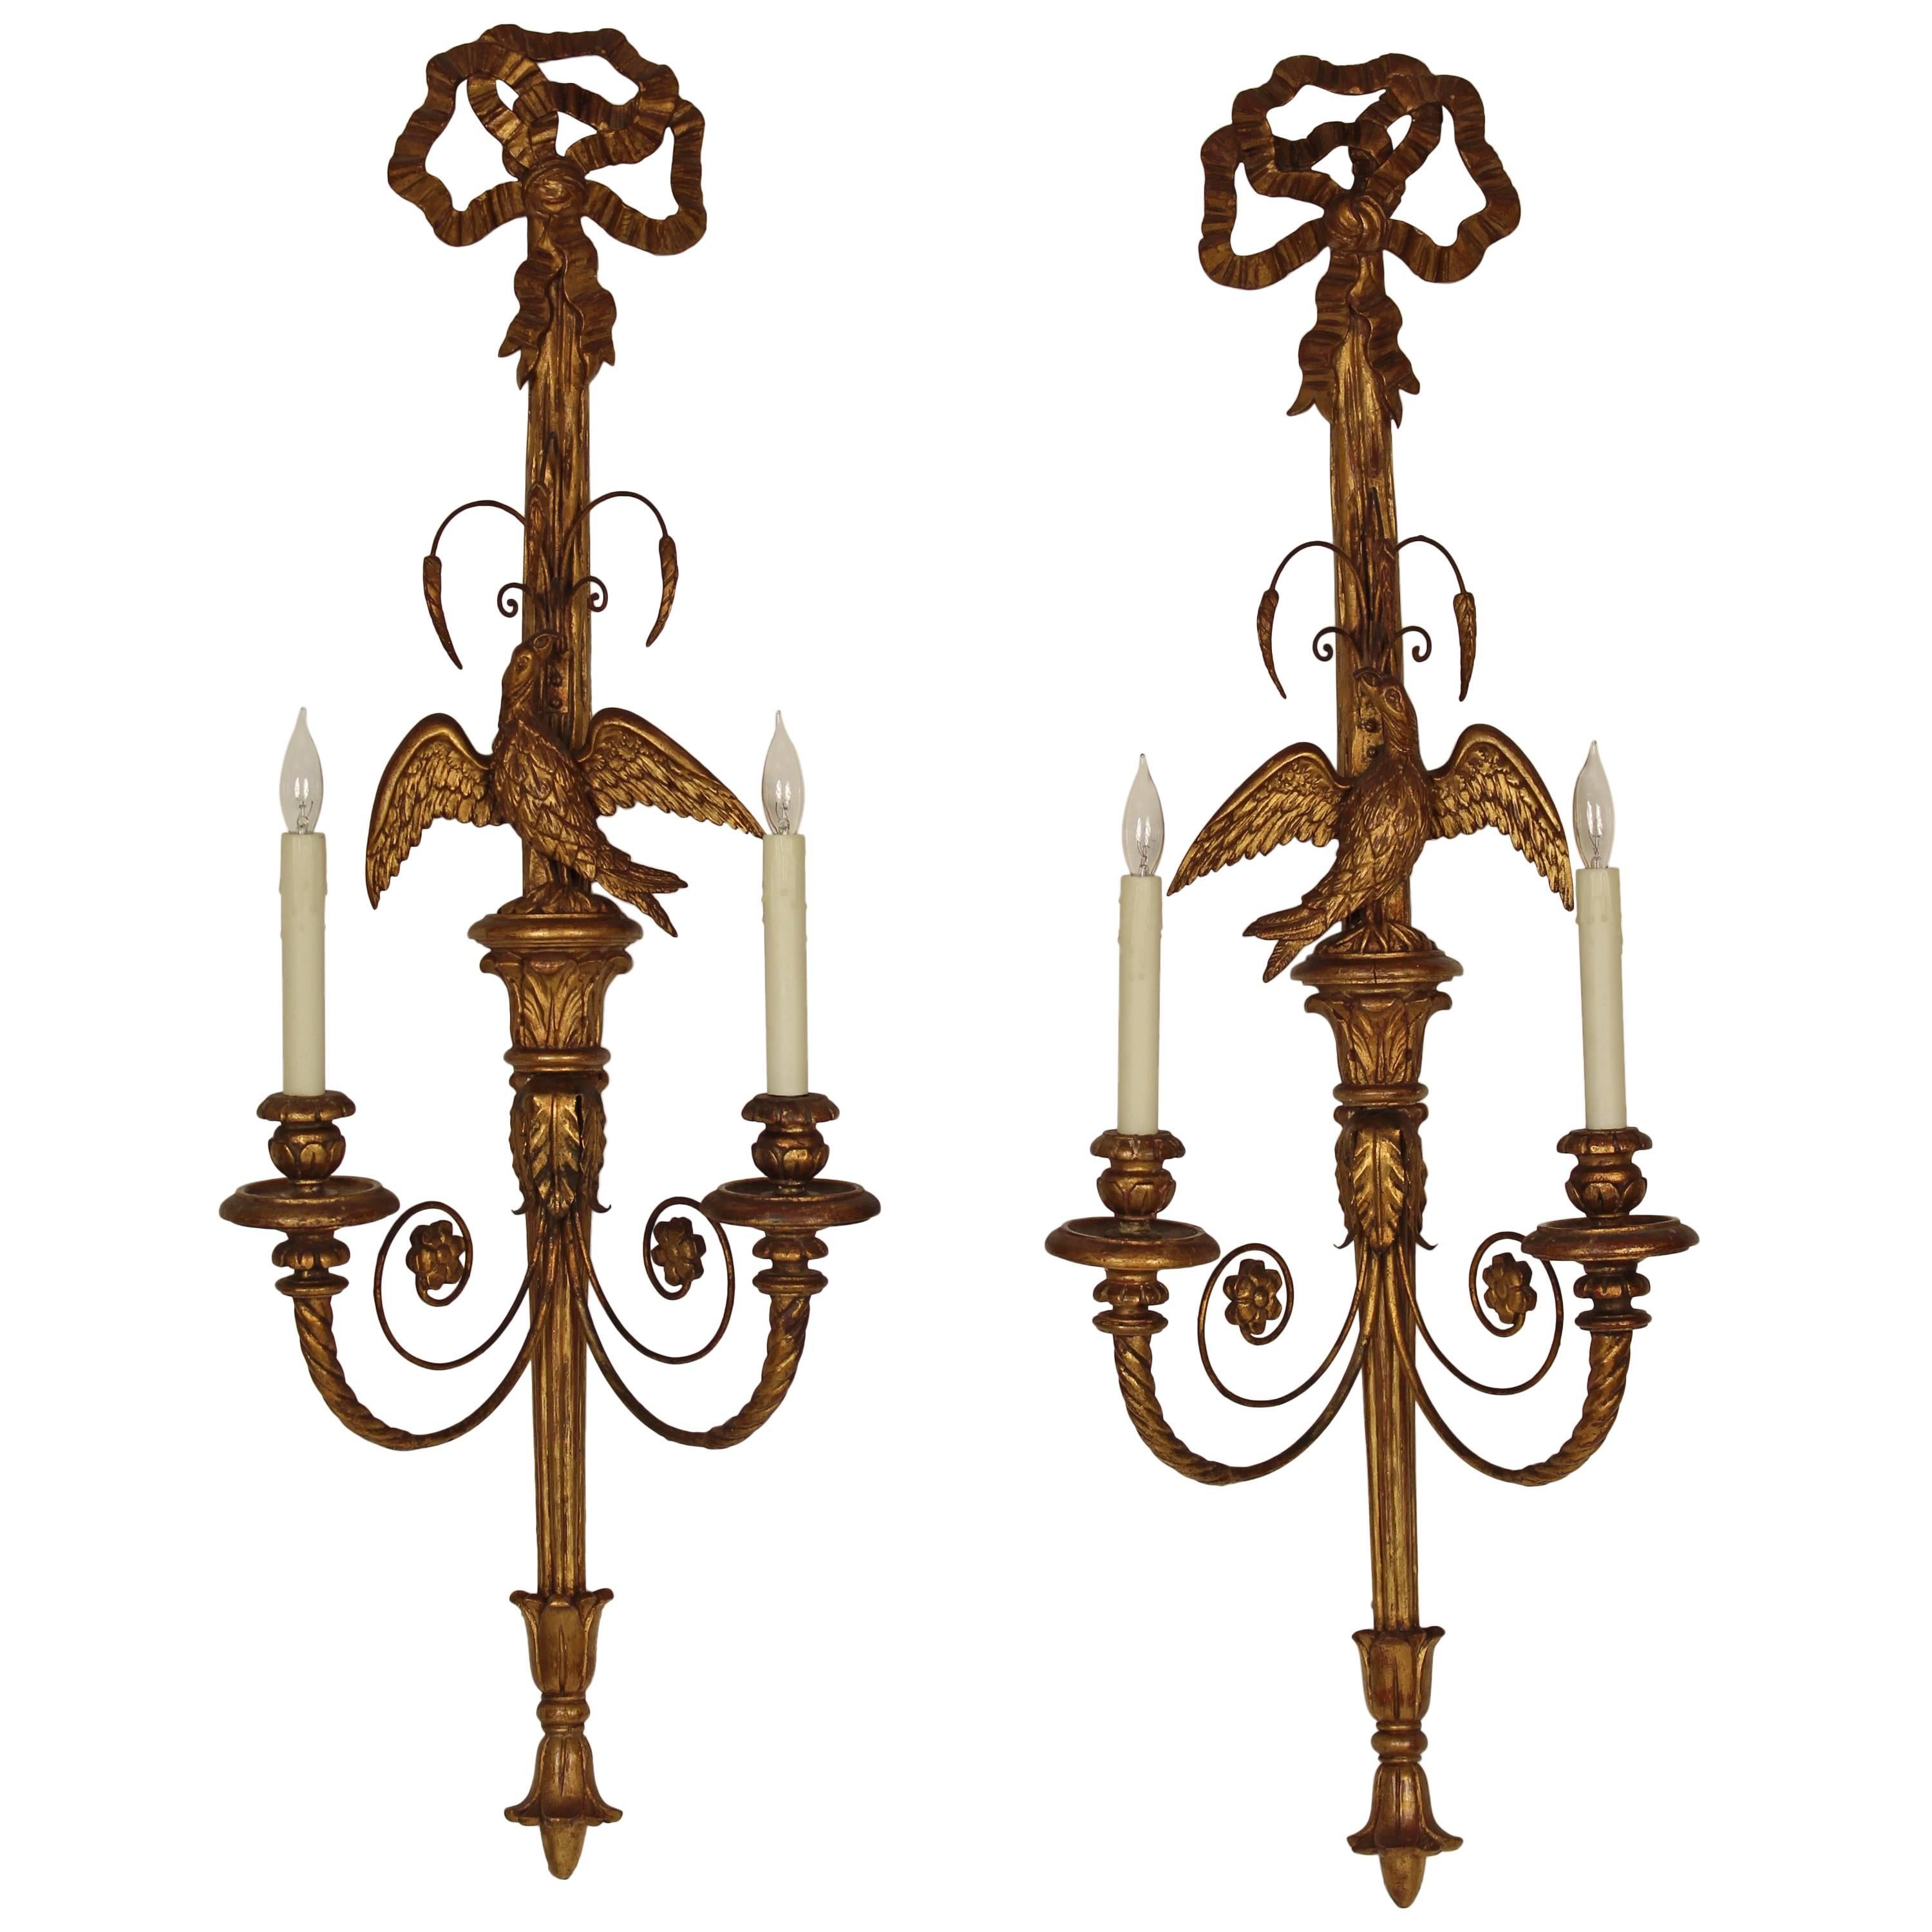 Pair of Neoclassical Style Wall Sconces